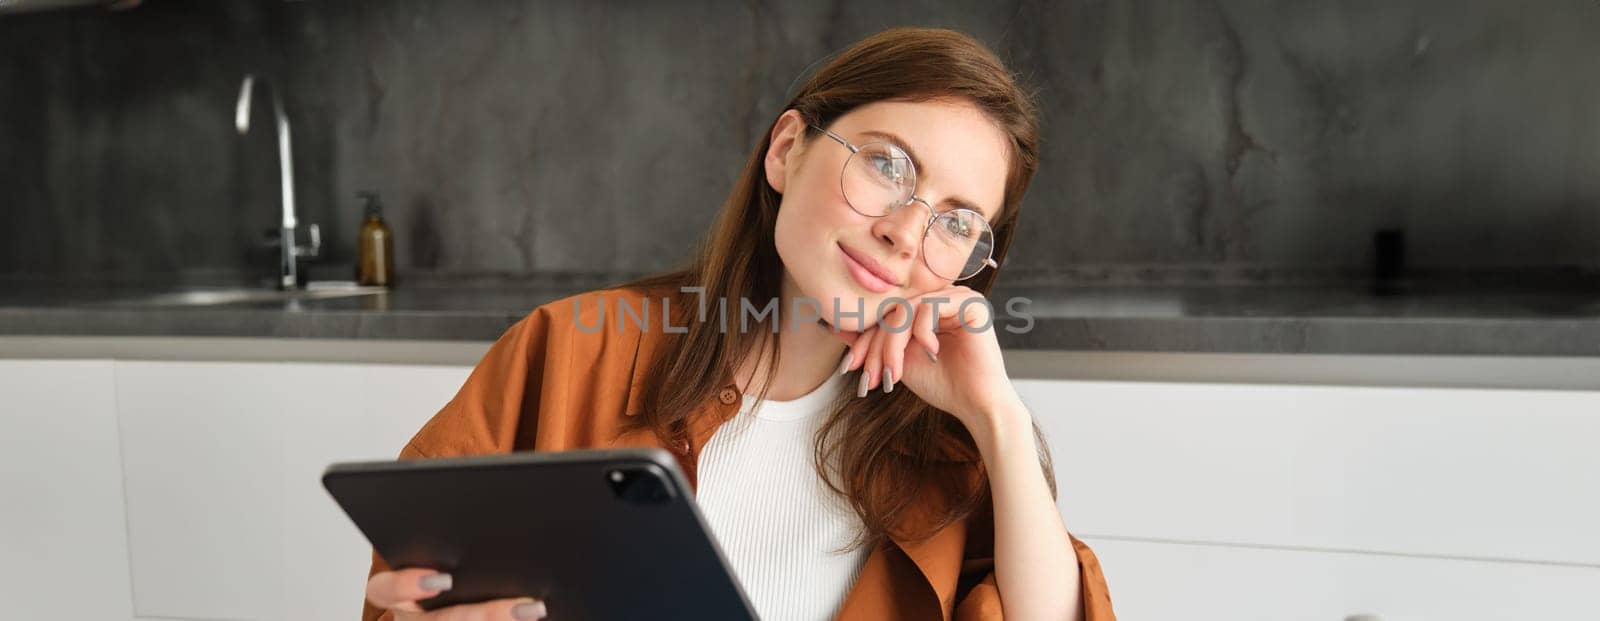 Portrait of busy young woman, self-employed entrepreneur sitting at home with digital tablet, reading documents. Student working on project remotely, holding gadget, studying.